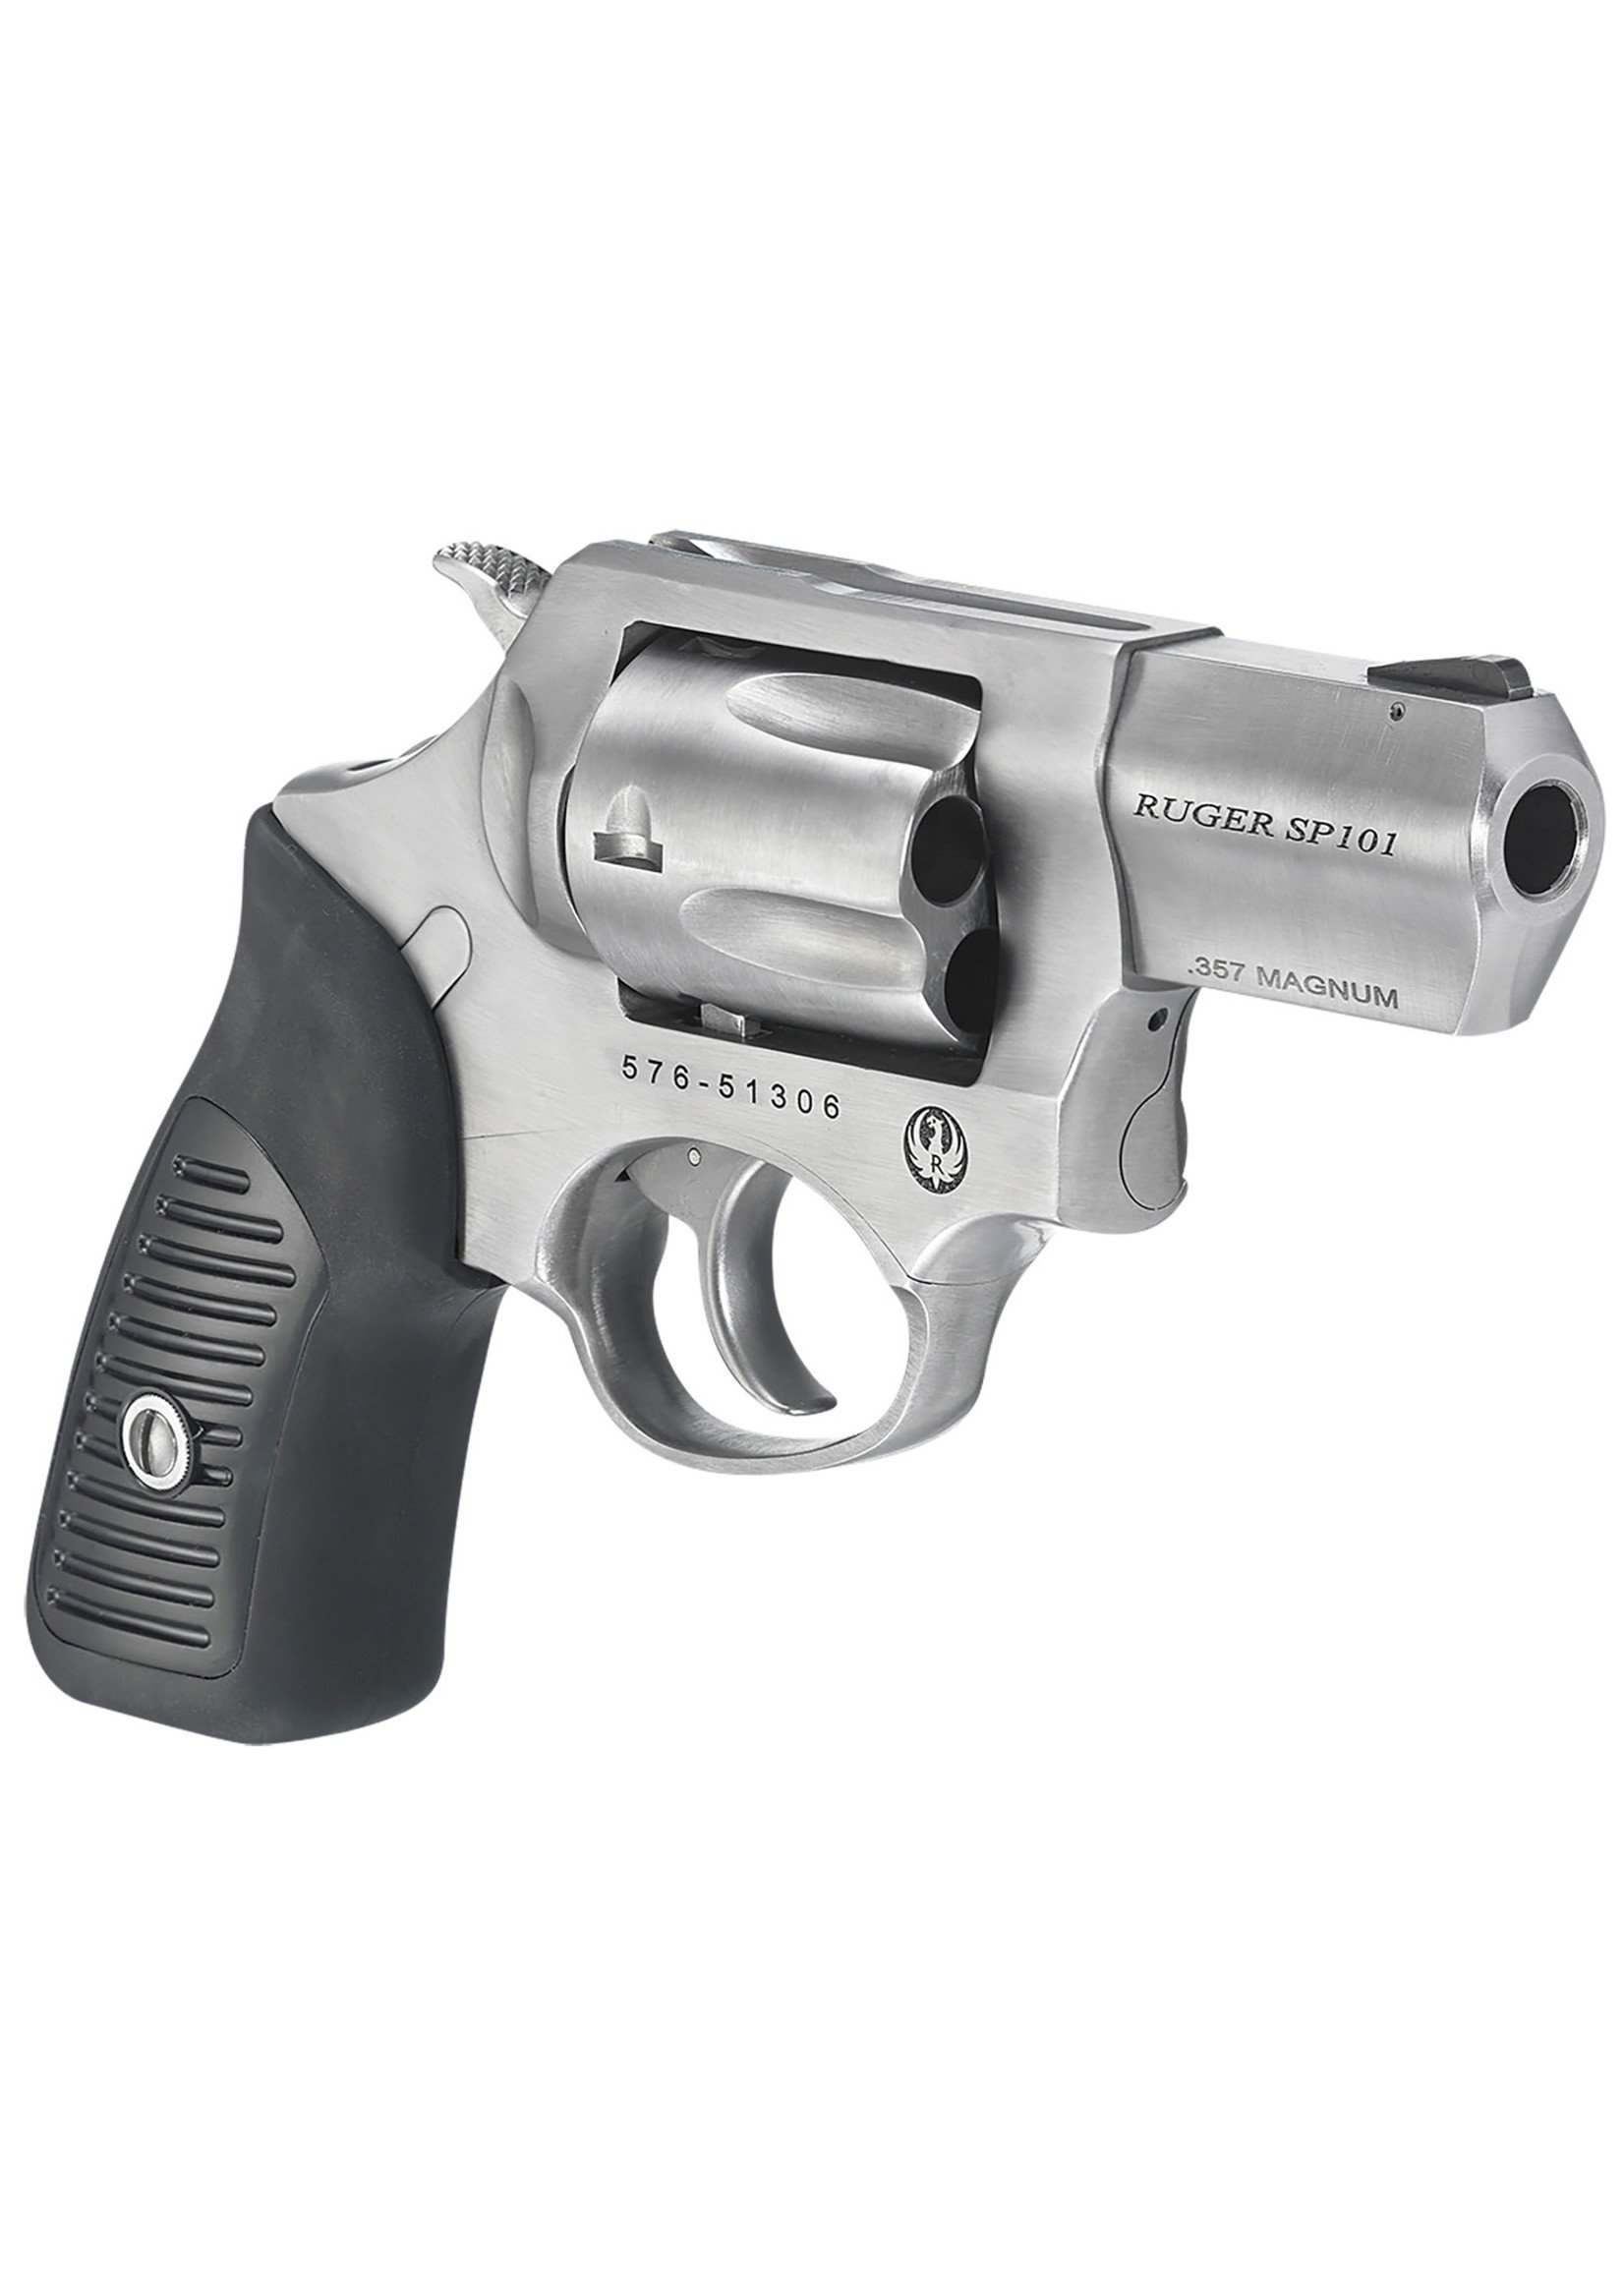 Sp101 Ruger Review